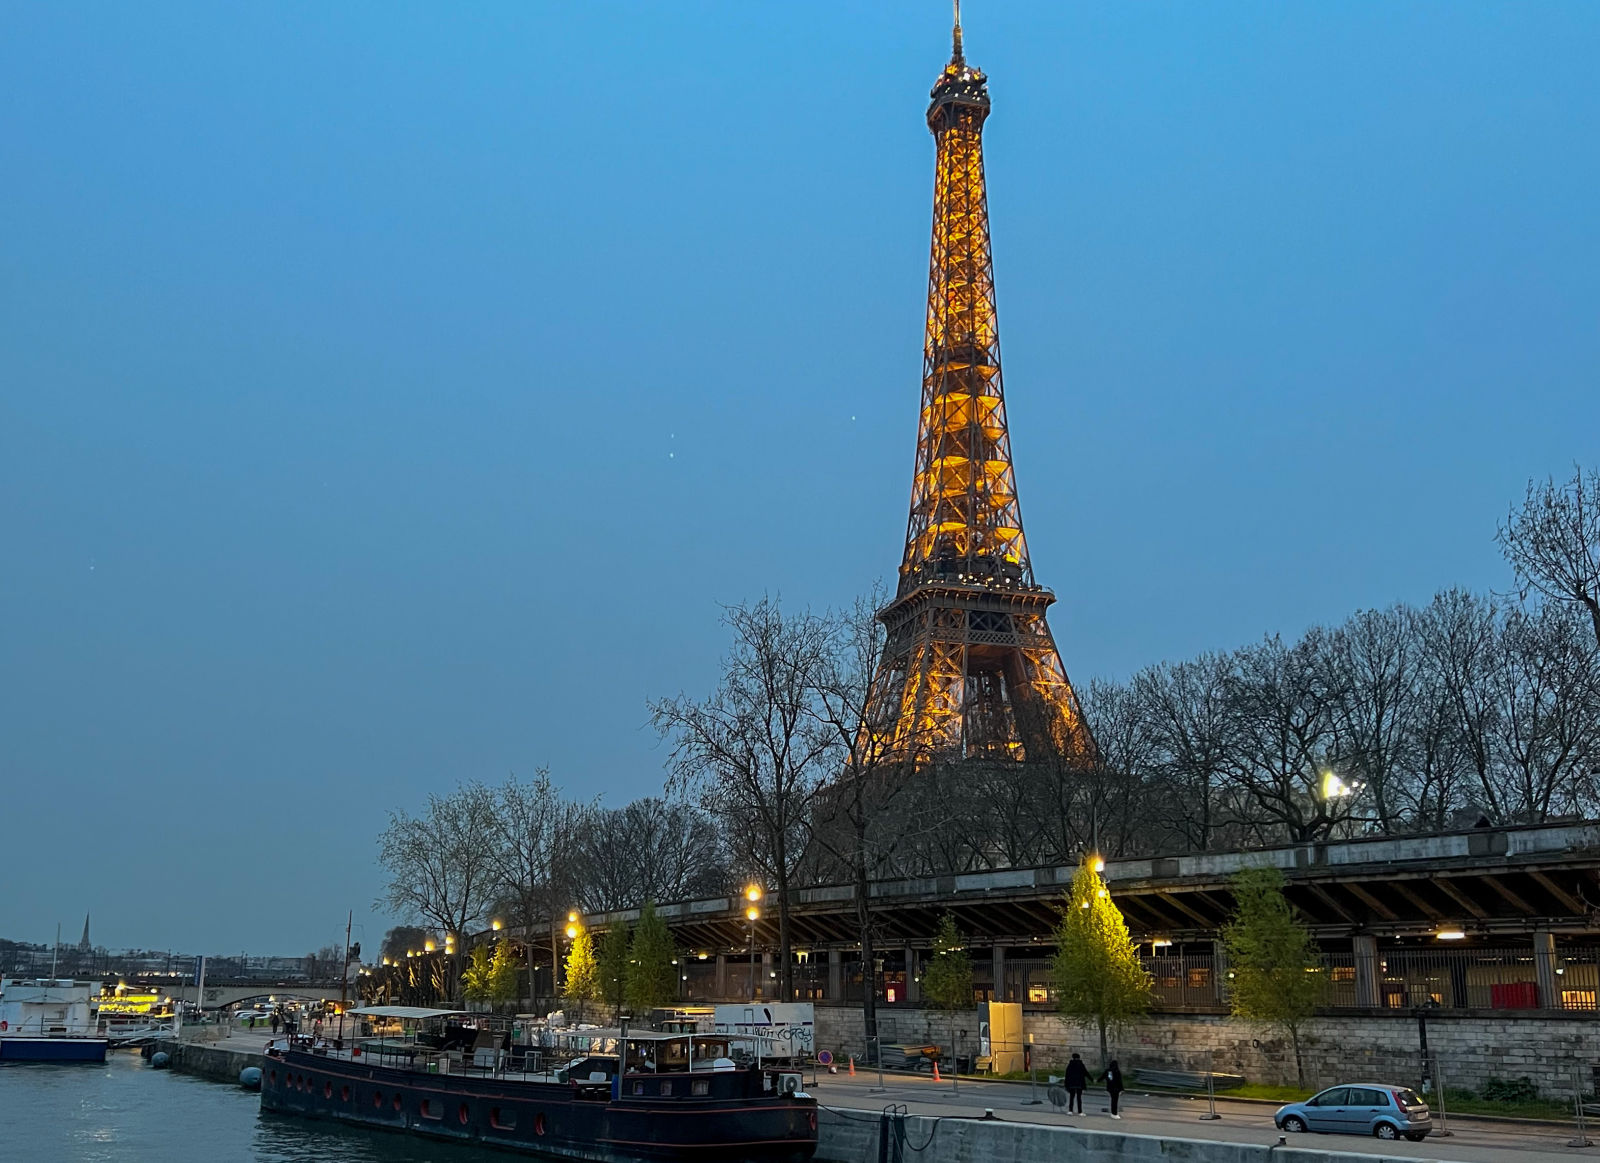 50+ Practical Paris Travel Tips for First-time Visitors - We3Travel